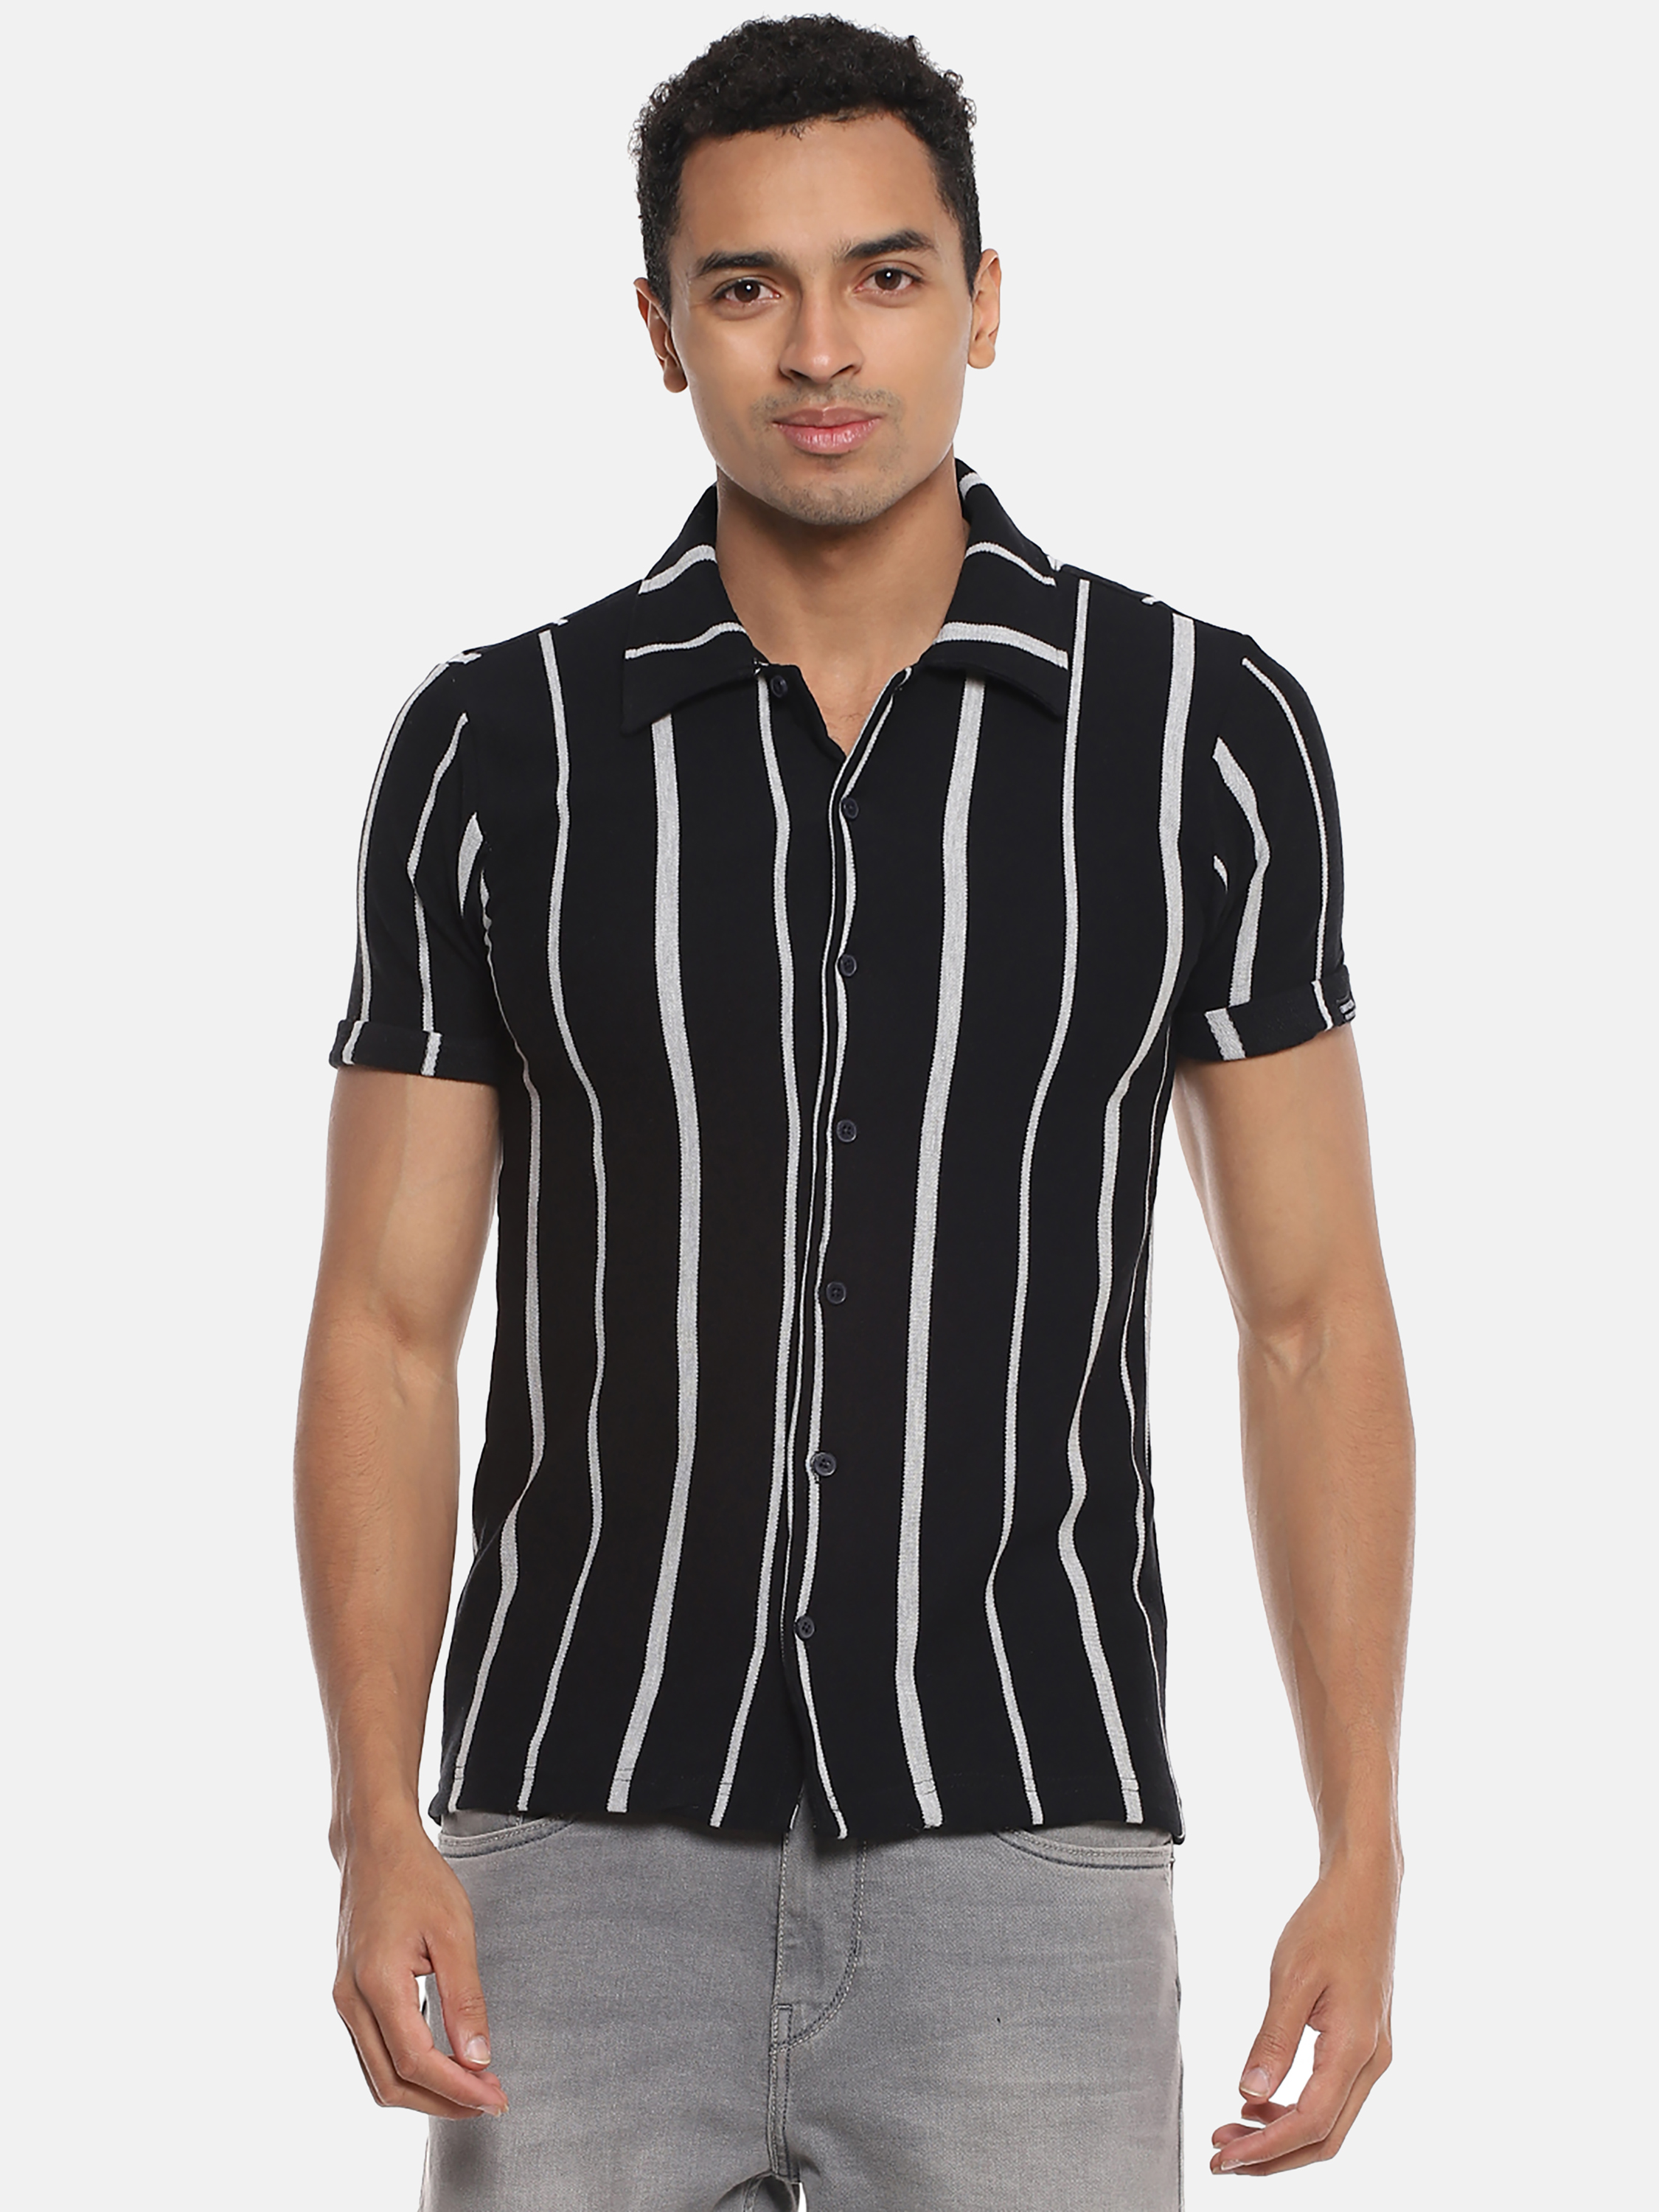 Campus Sutra Men Striped Casual Shirts